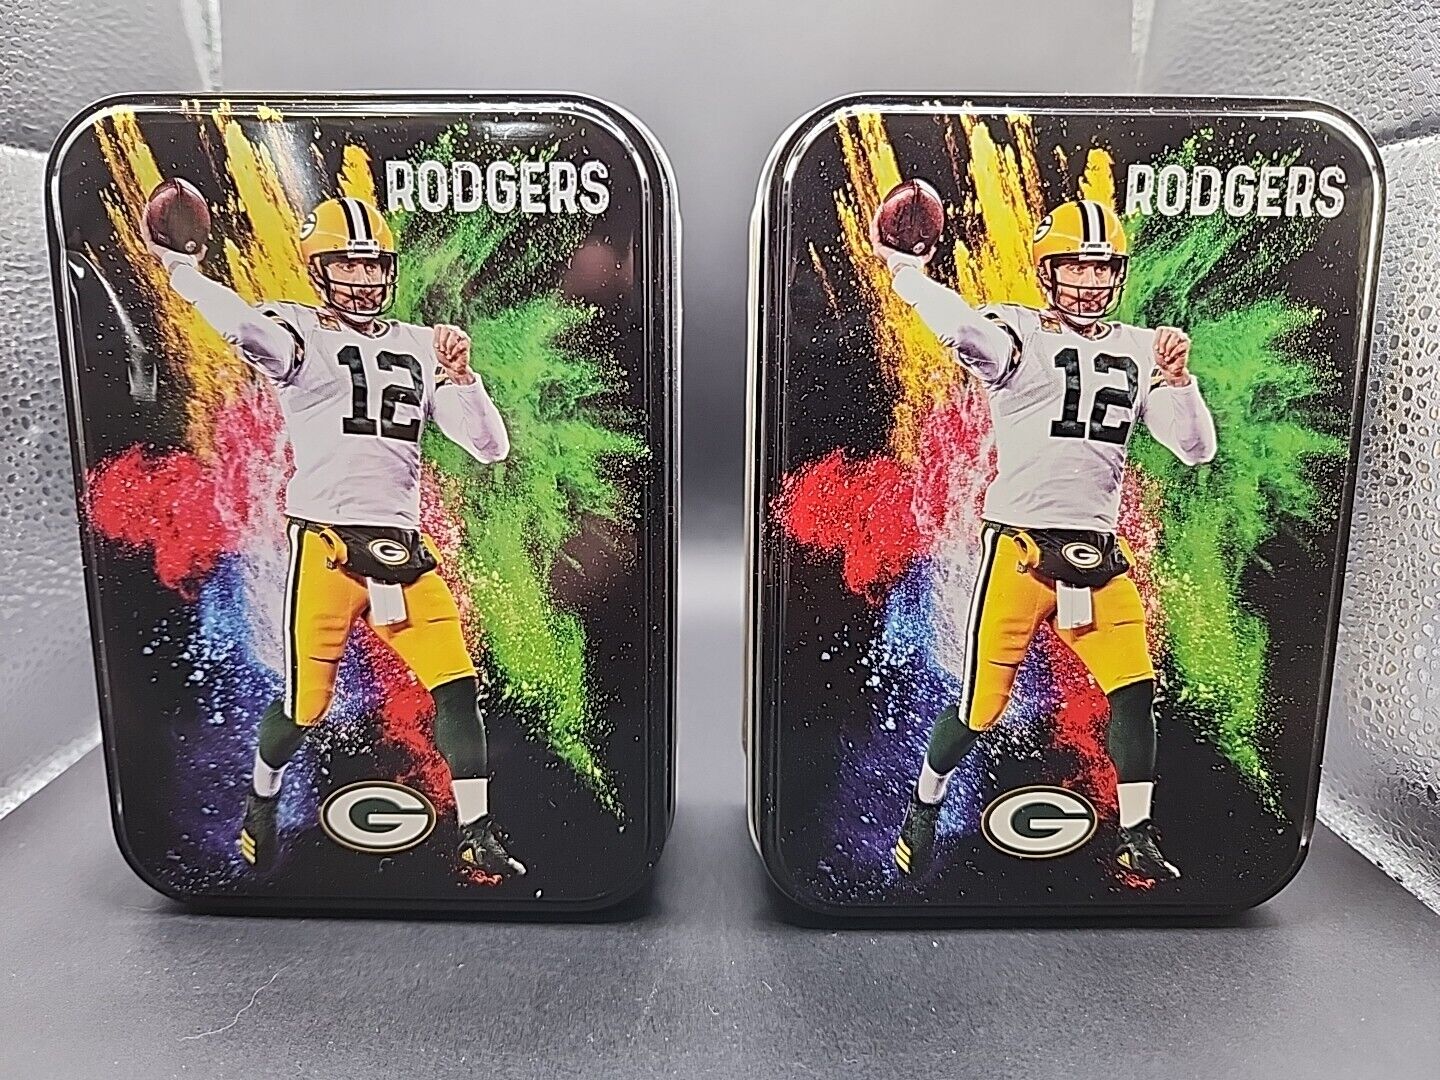 Aaron Rodgers - Green Bay Packers - Two Empty Collectble Tins